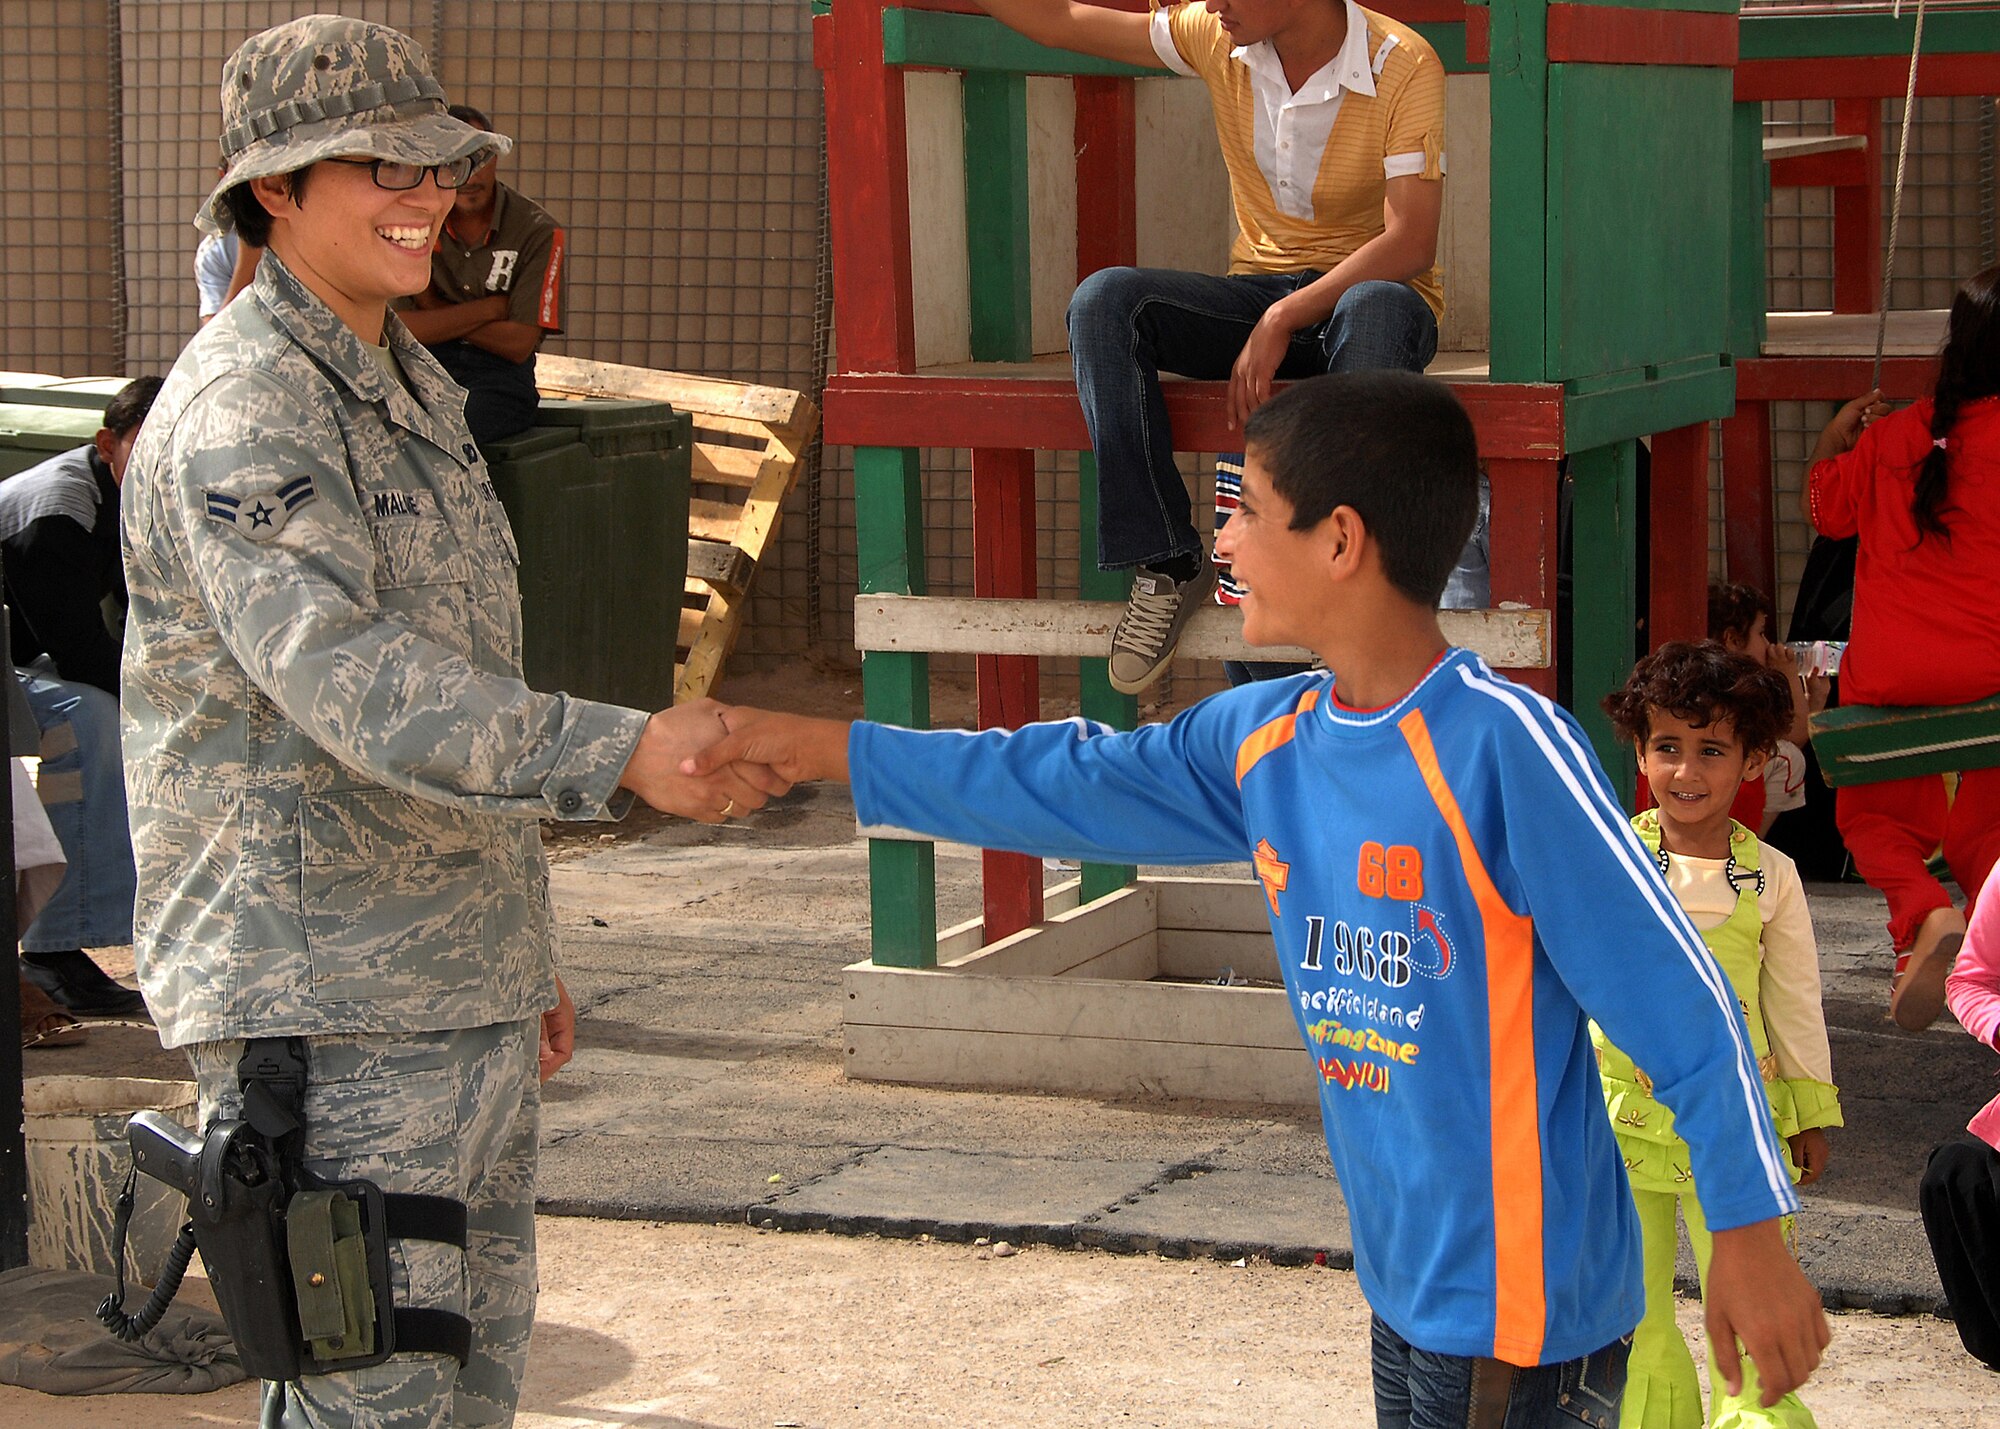 Camp Bucca, Iraq -- Airman 1st Class Martina Malone, a Security Forces member assigned to the 887th Expeditionary Security Forces Squadron, receives a handshake from an Iraqi boy waiting to visit his father at the Theater Internment Facility (TIF) at Camp Bucca, Iraq, on Sept. 29. The 887th ESFS controls access to detainees  at the TIF and processes visitation procedures for family members. The Air Force works side by side with Army Soldiers in manning the facility, which houses more than 18,000 detainees. Airman Malone is deployed from Dyess Air Force Base, Texas. (U.S. Air Force photo/Tech. Sgt. Raheem Moore)